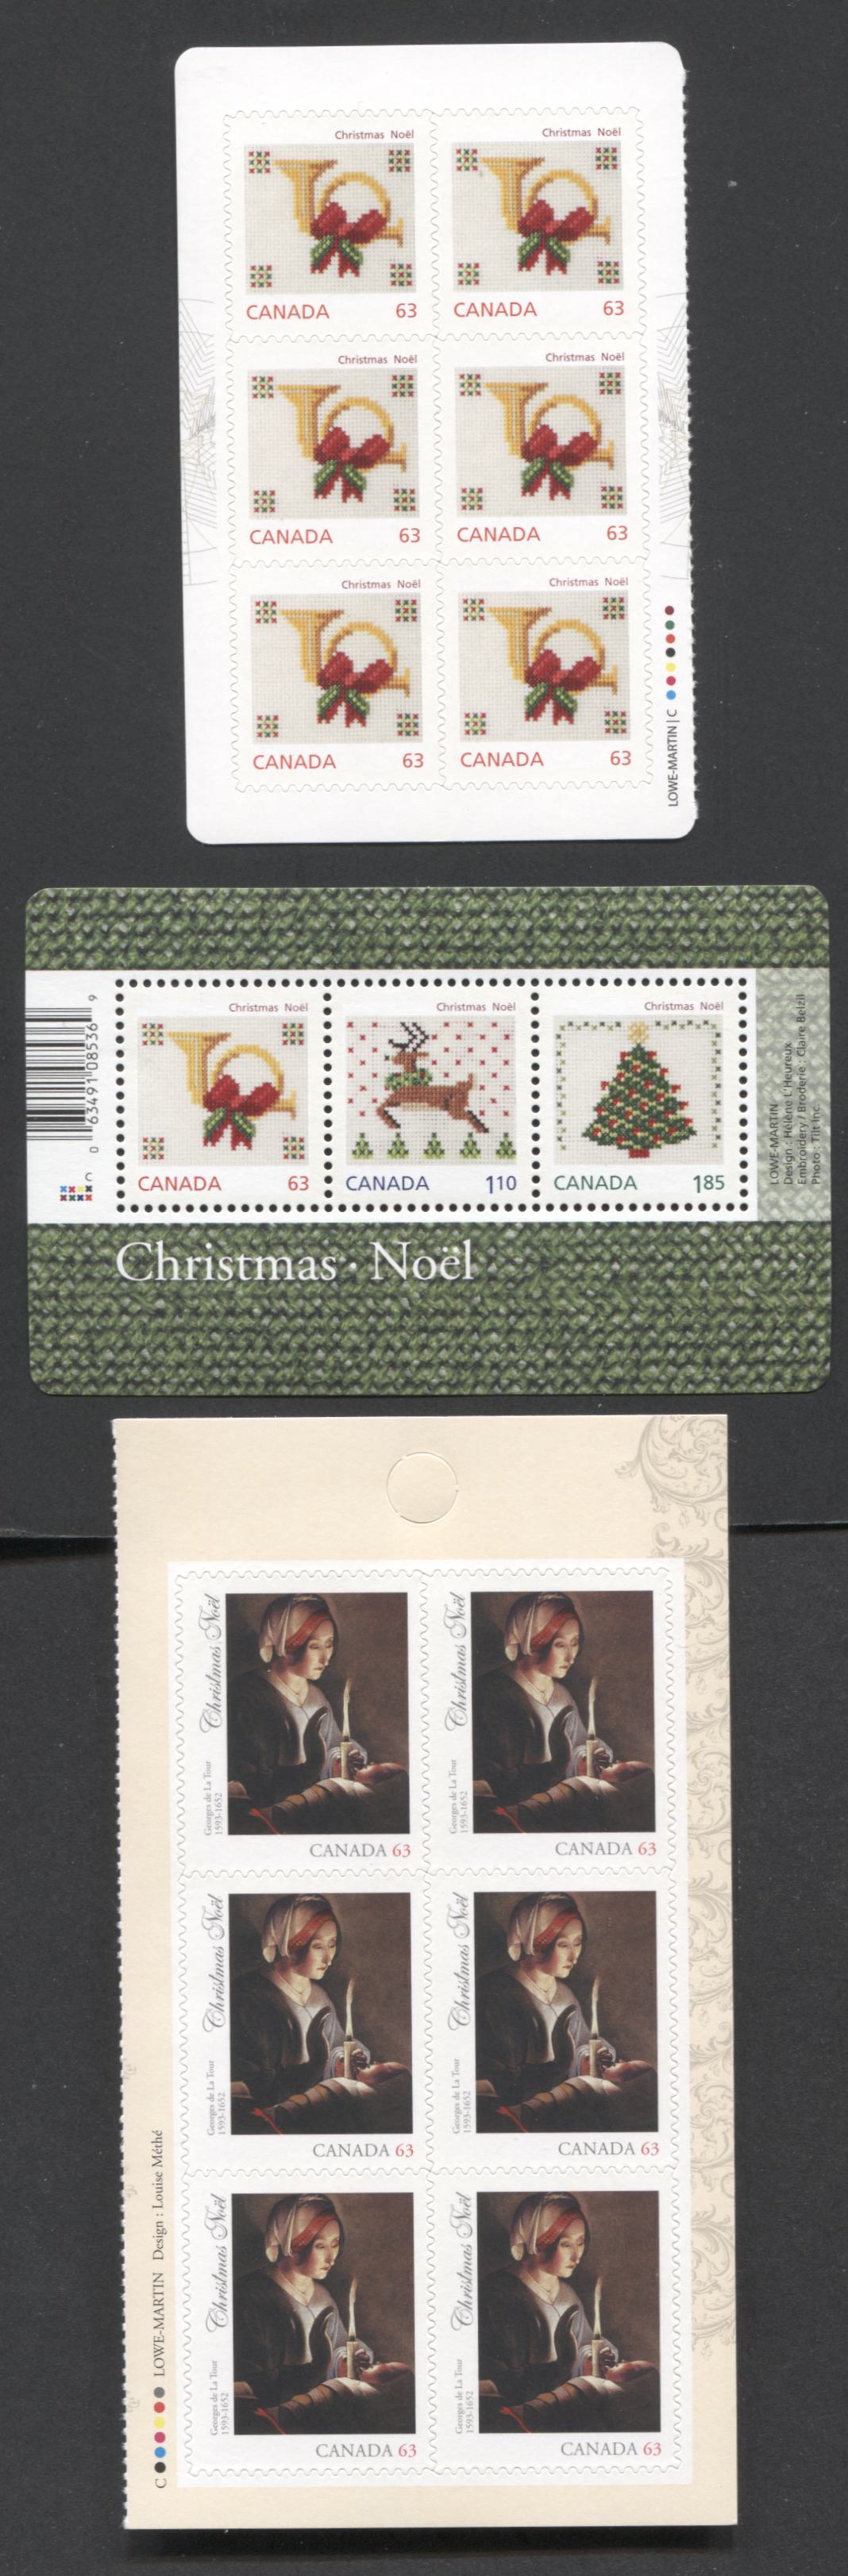 Lot 16 Canada #2688-2689, 2687 63c-$1.85 Multicolored Cross Stitched Horn-Christmas Tree & Saint Anne, 2013 Christmas Issue, 3 VFNH Booklet Panes Of 6 & Souvenir Sheet